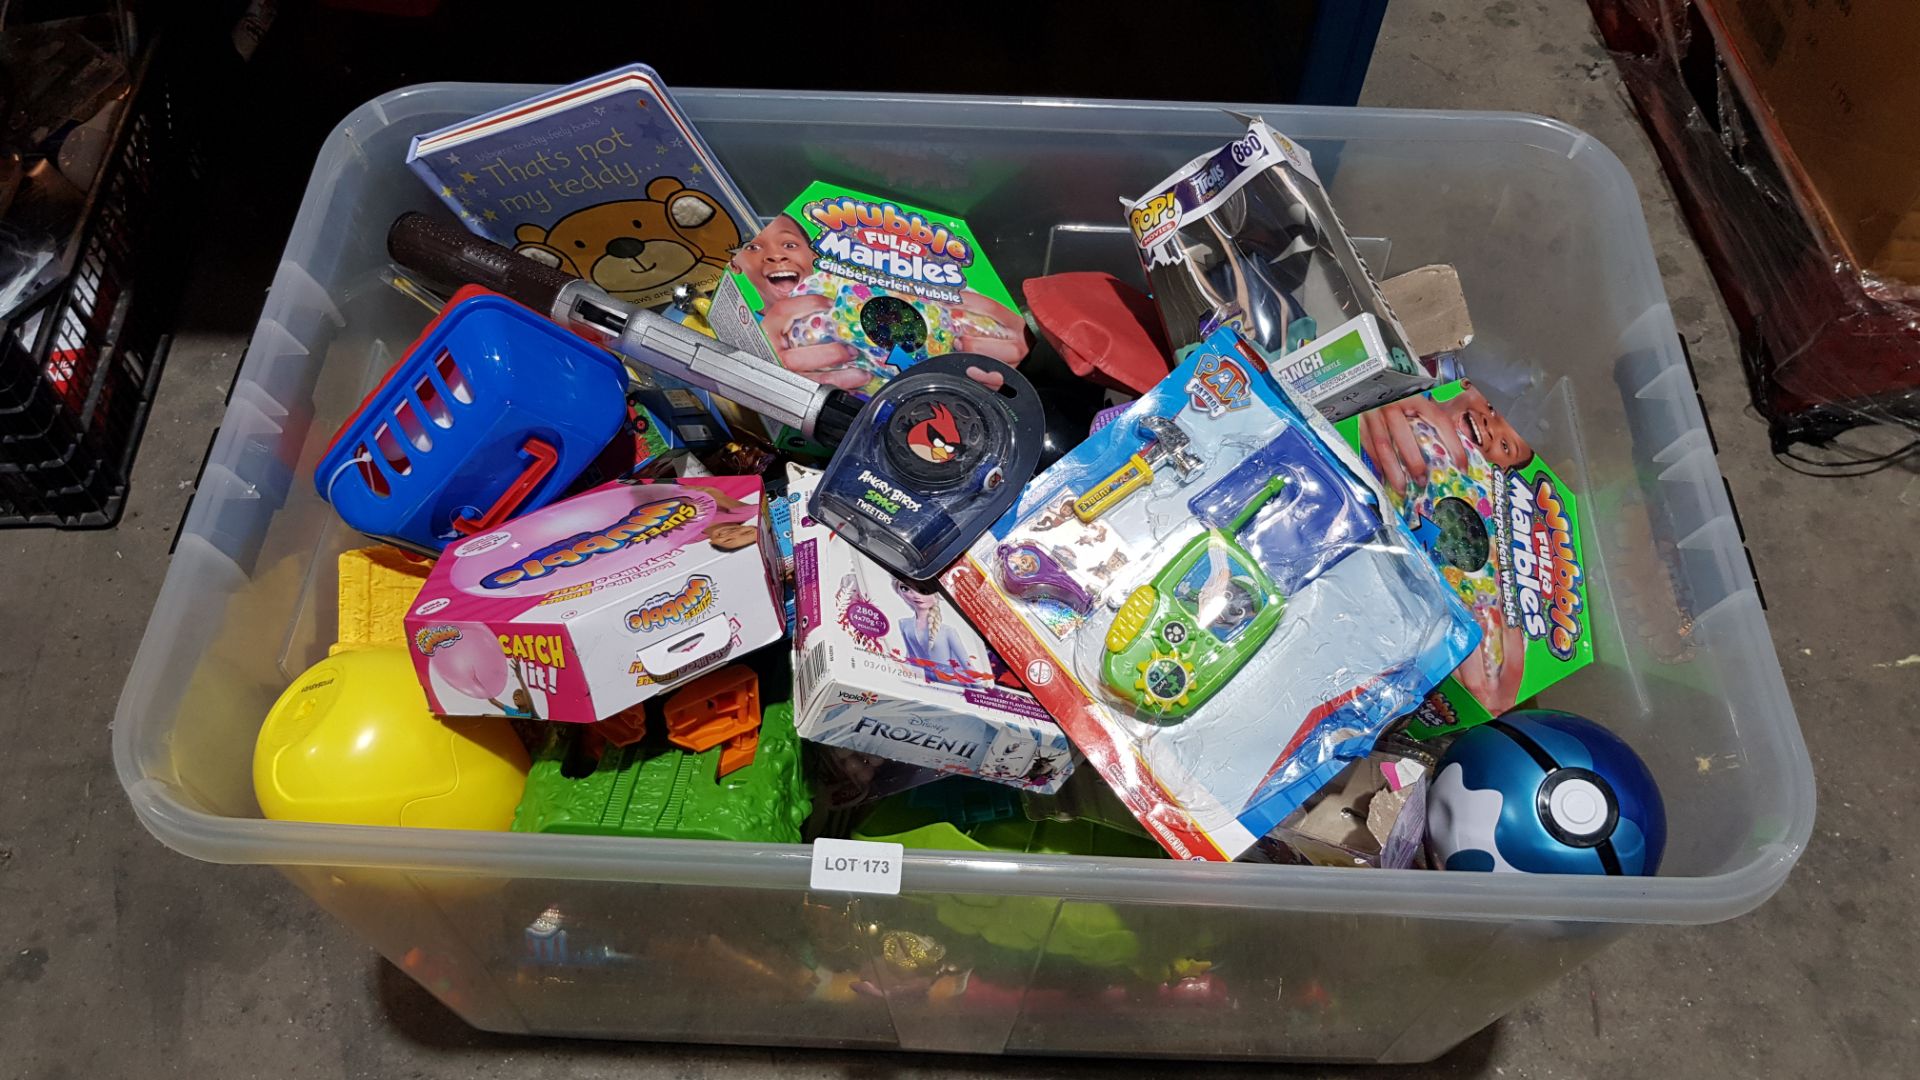 (R1G) Contents Of Large Box. A Quantity Of Small Toys To Include Wubble Fulls Marbles, PokŽmon, Ang